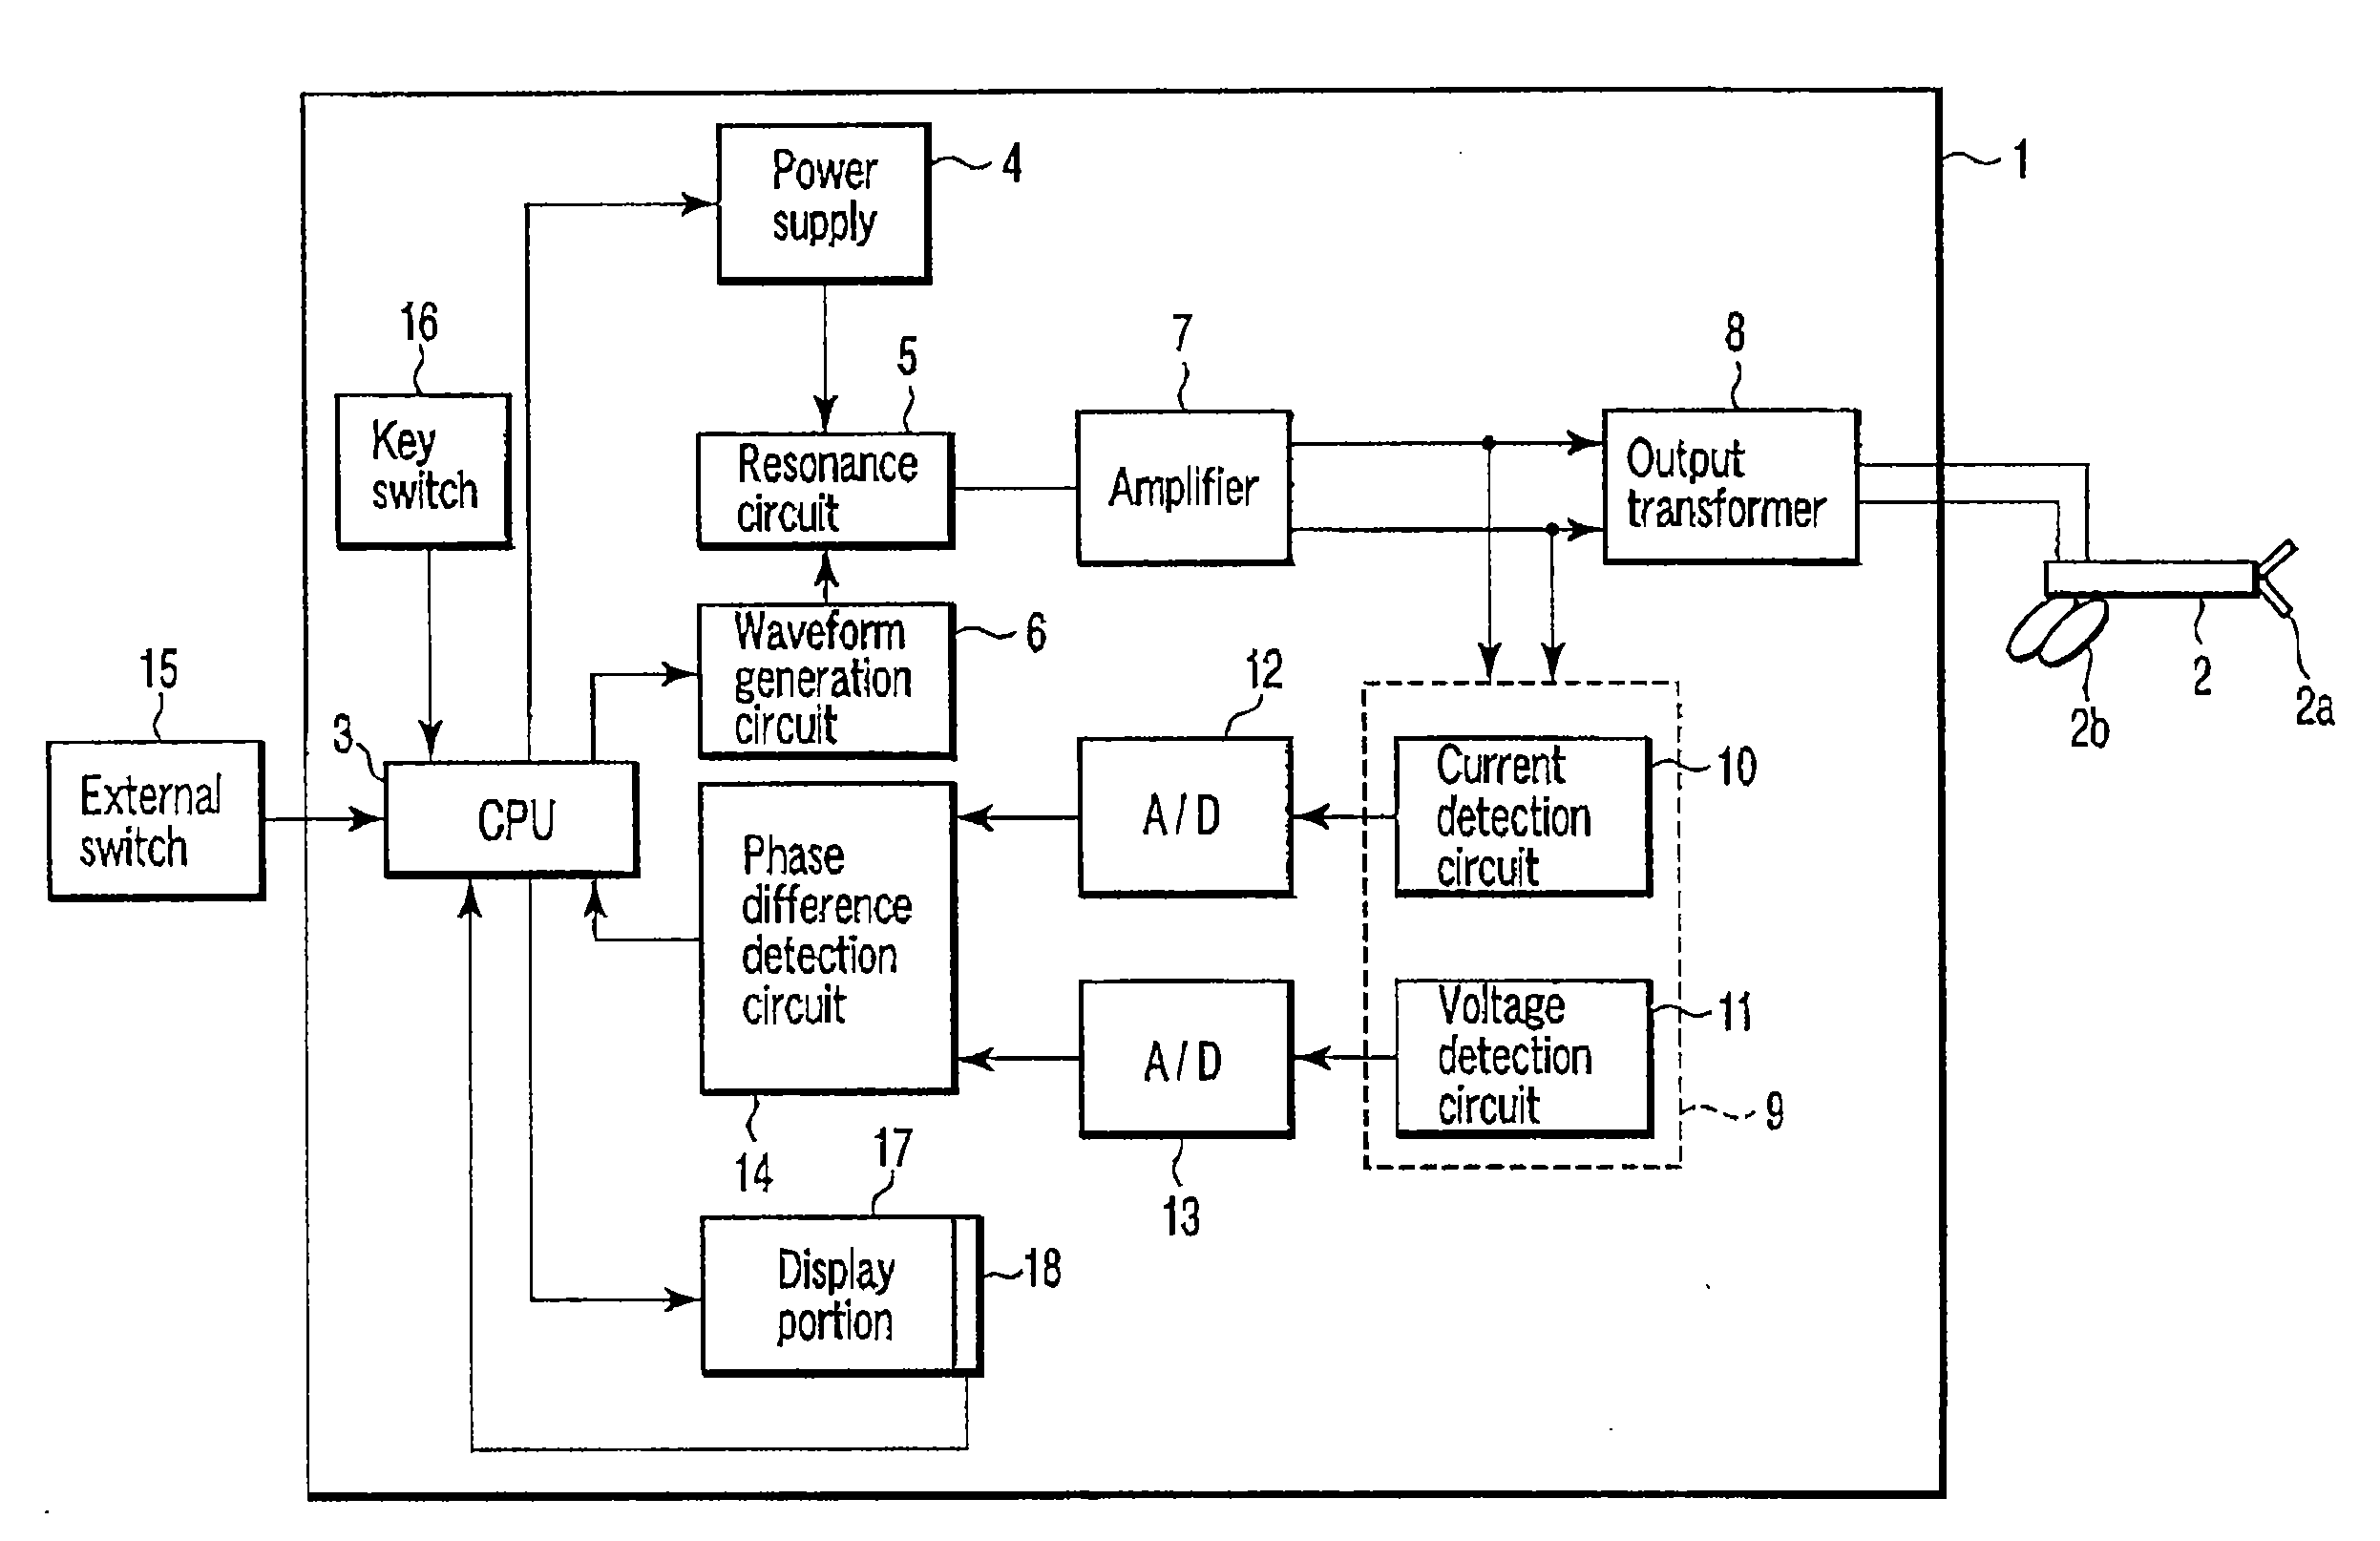 Electric processing system